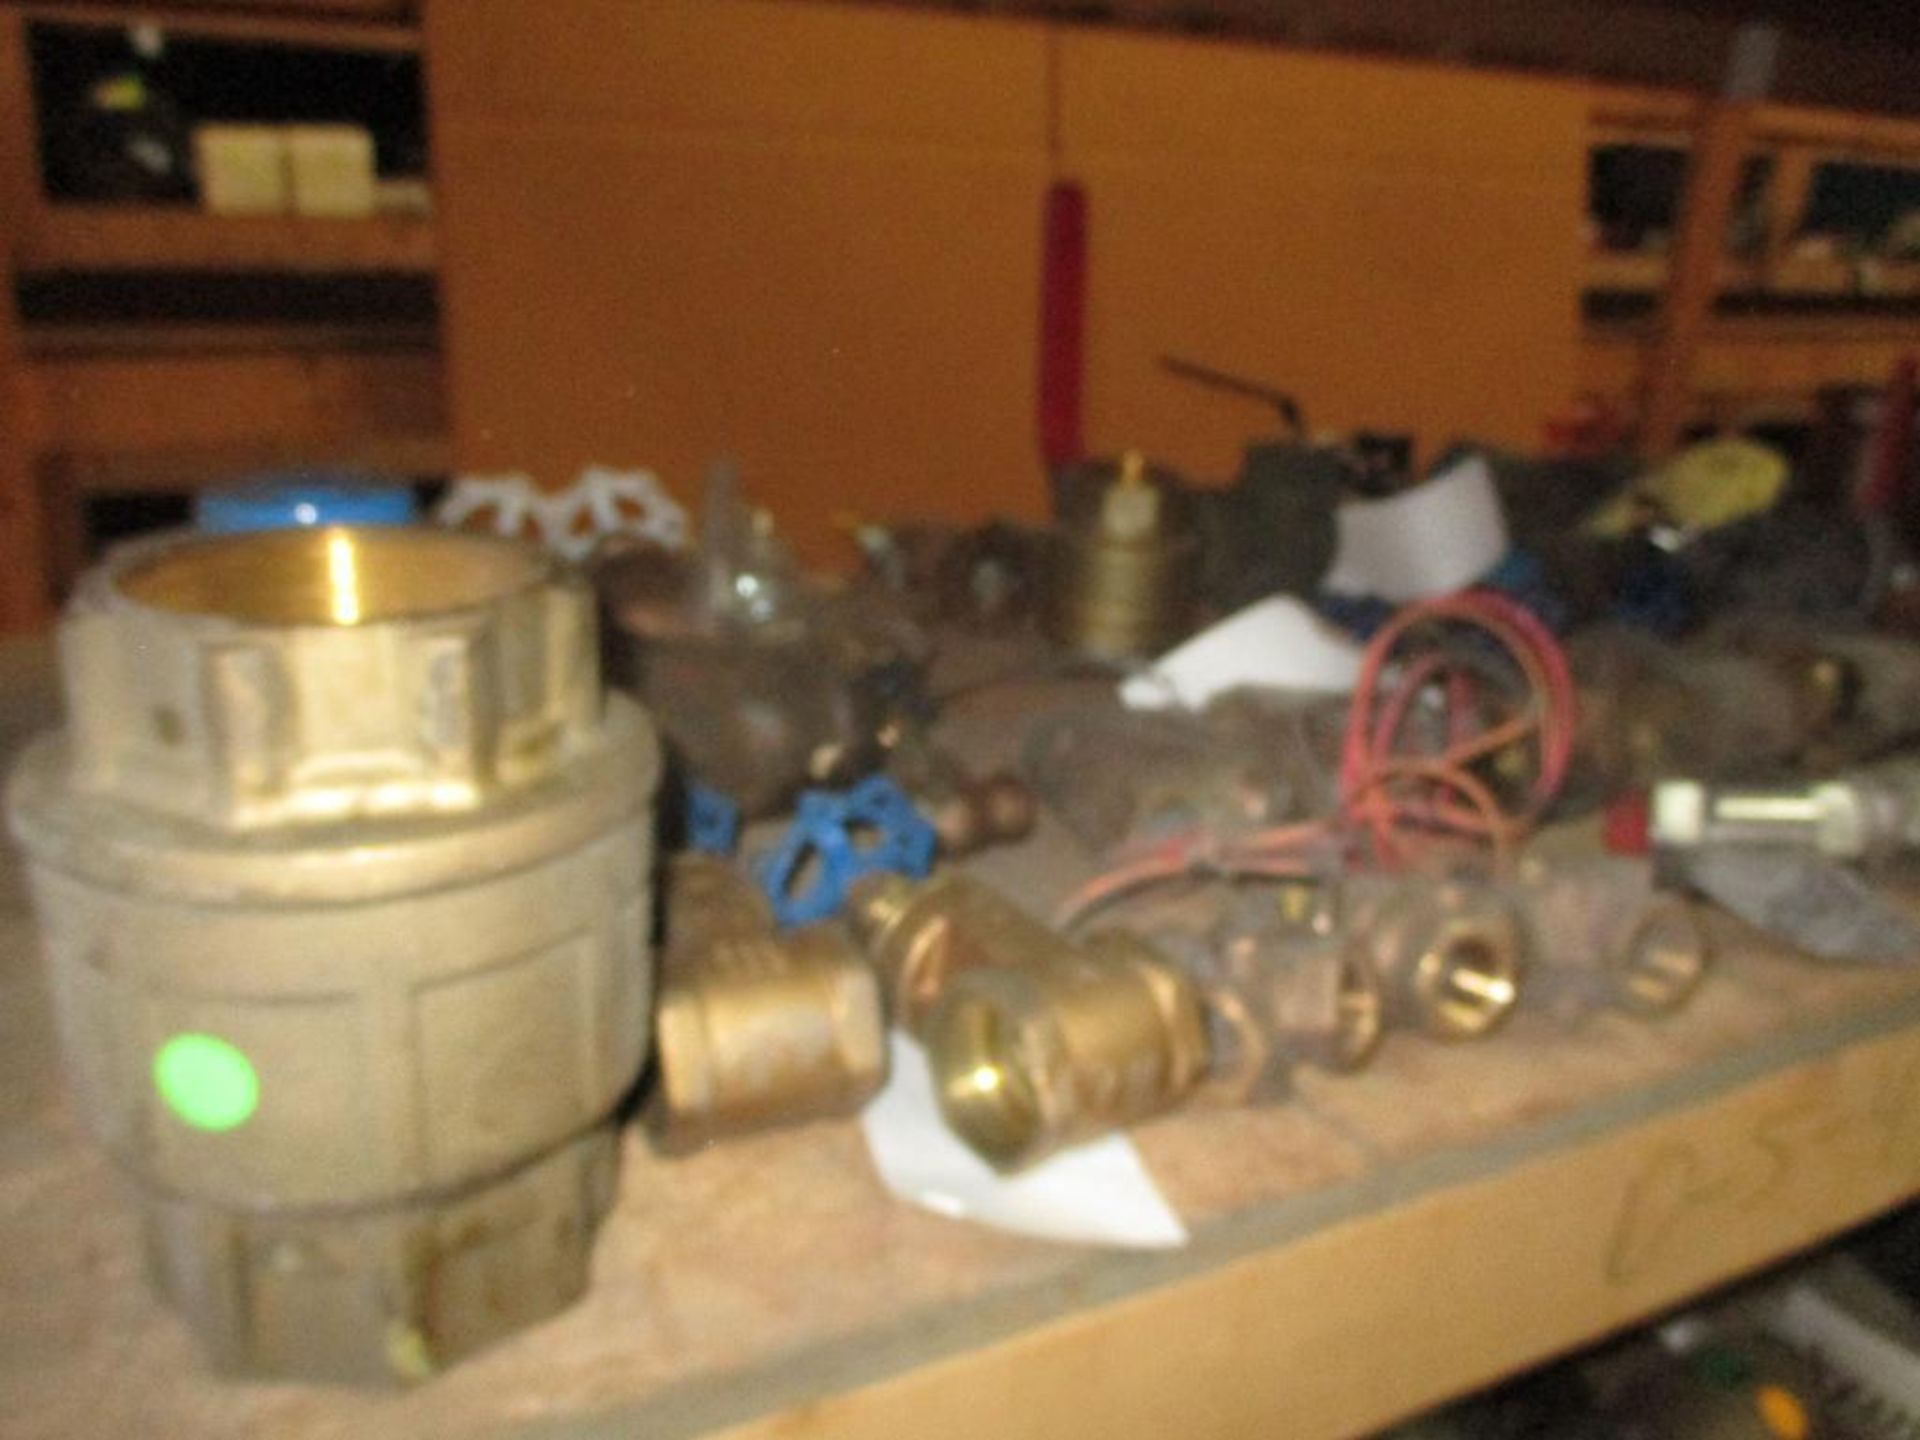 Contents of Shelf D-5-4 & D-6-4; Brass Valves, Stainless Valves, Jenkins, Fisher, Durco, American, &